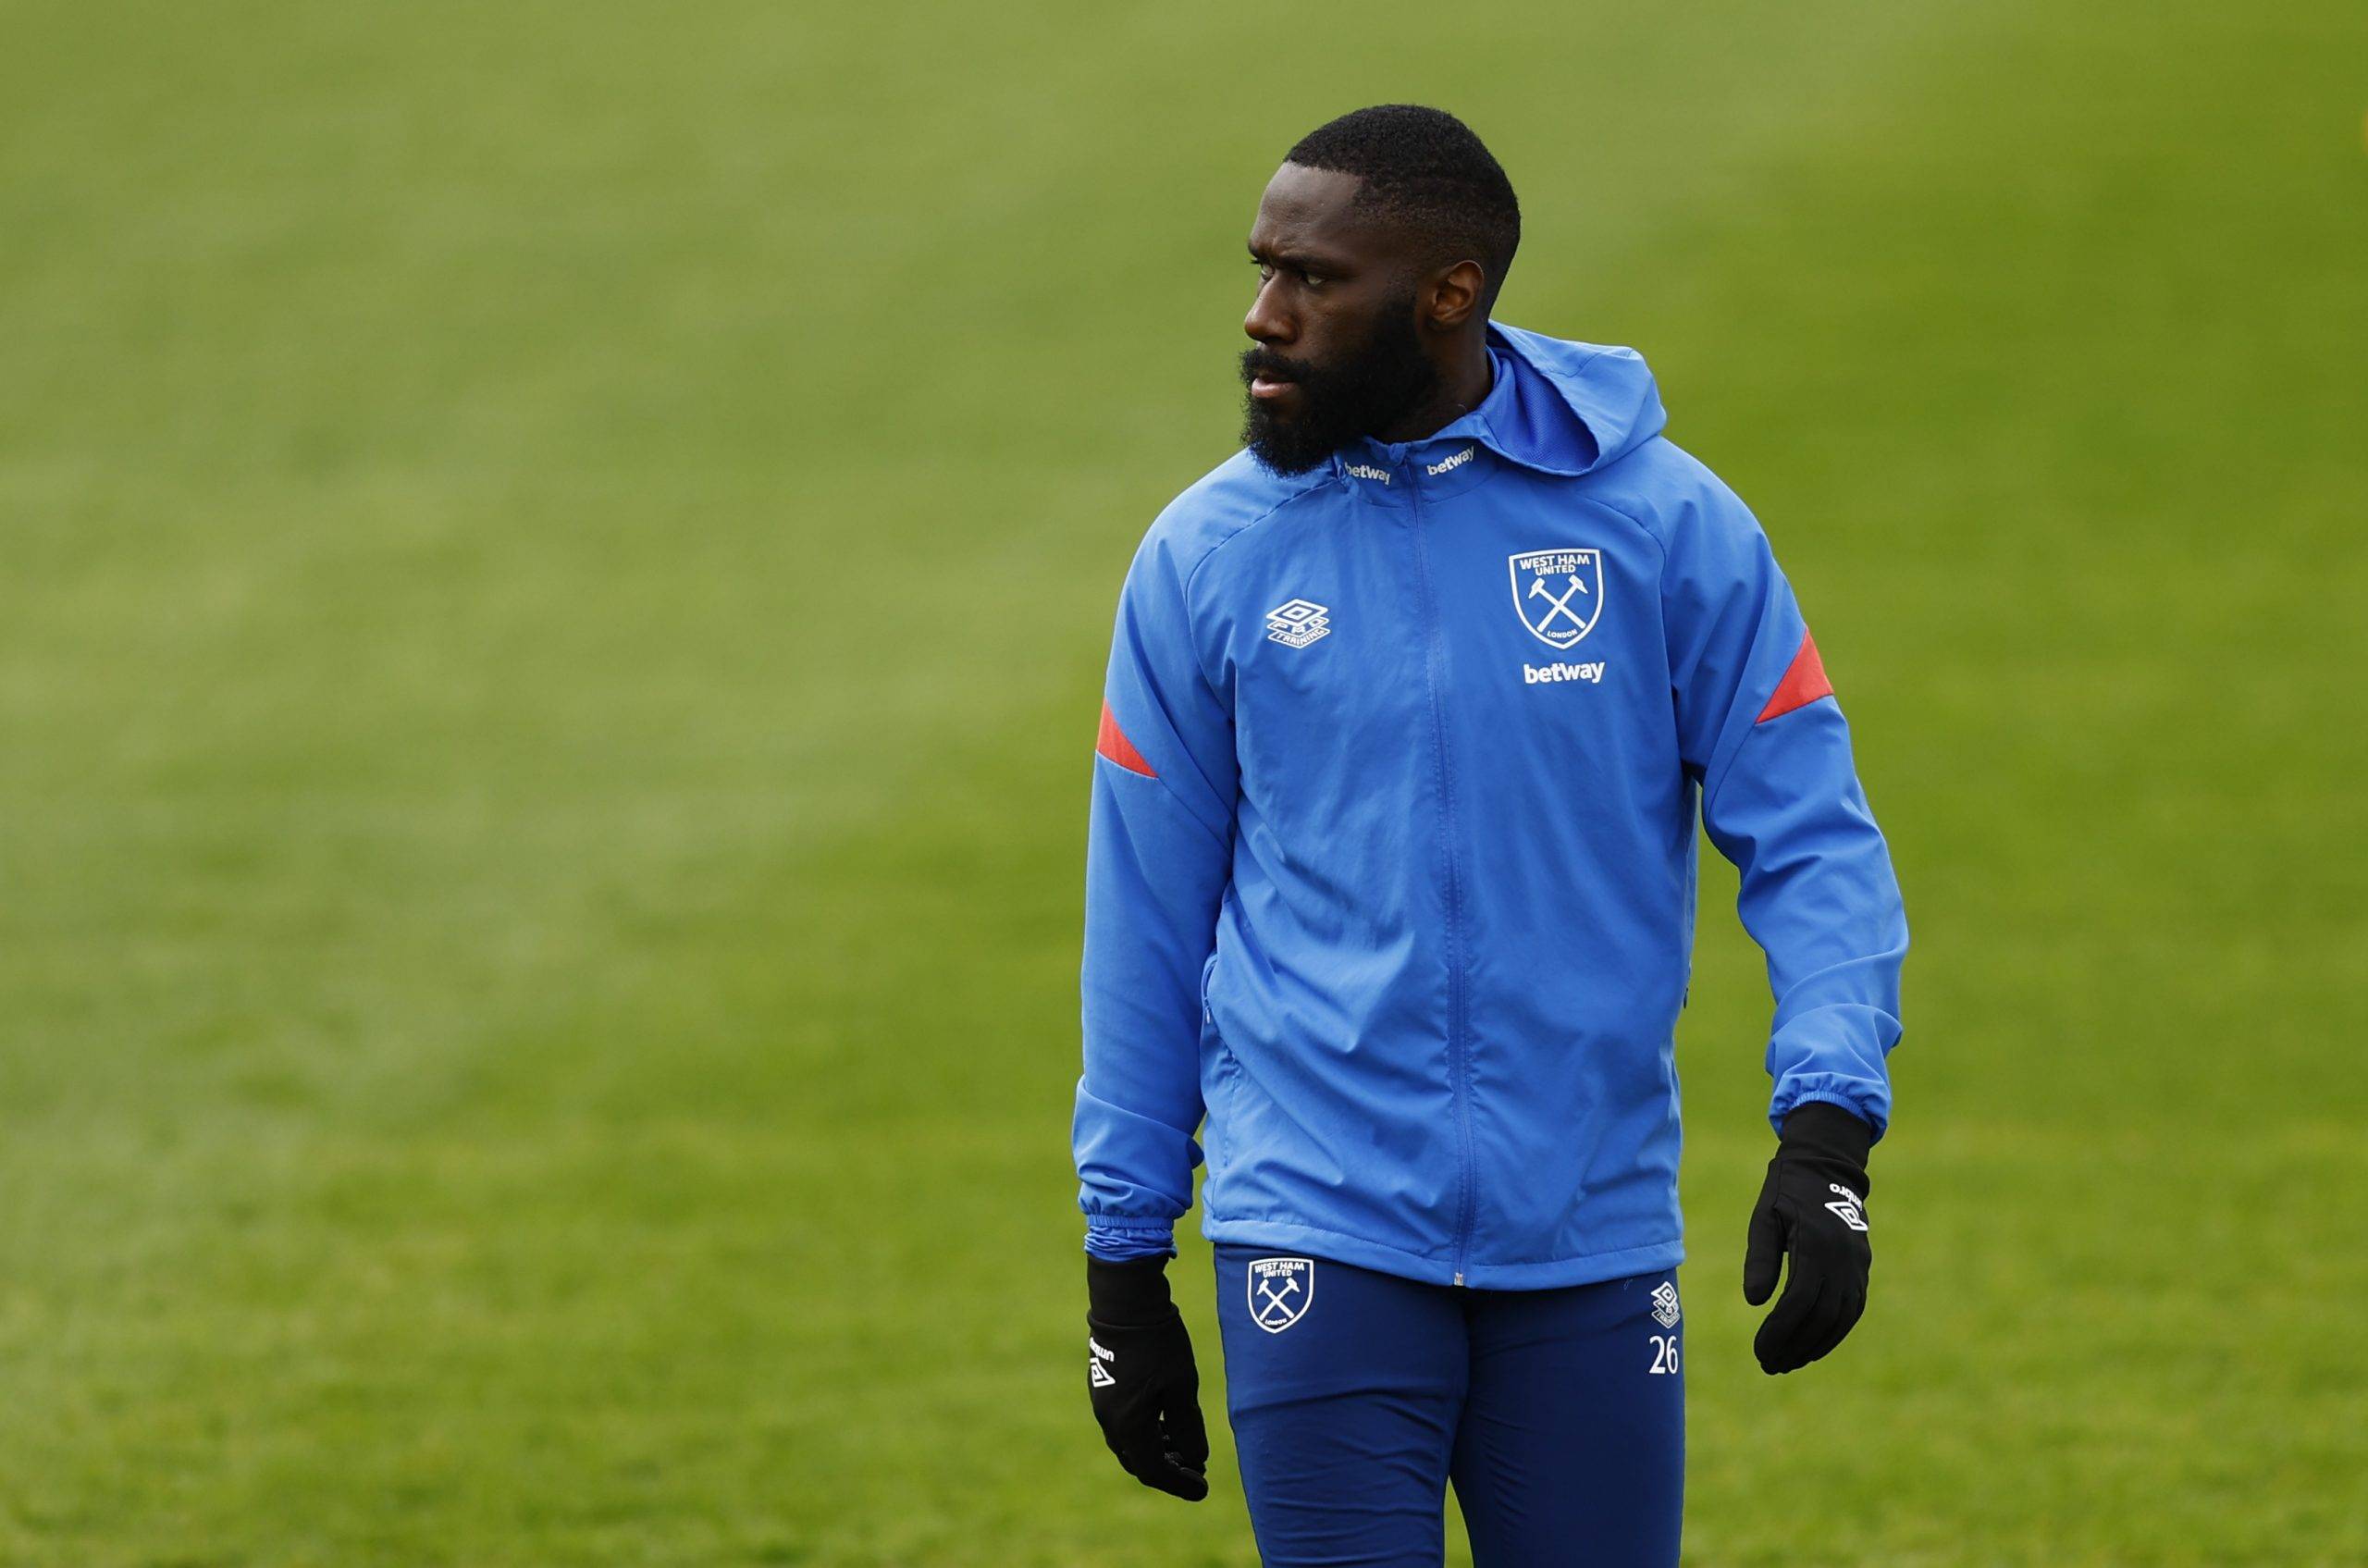 West Ham United may now look to sell Arthur Masuaku - Premier League News